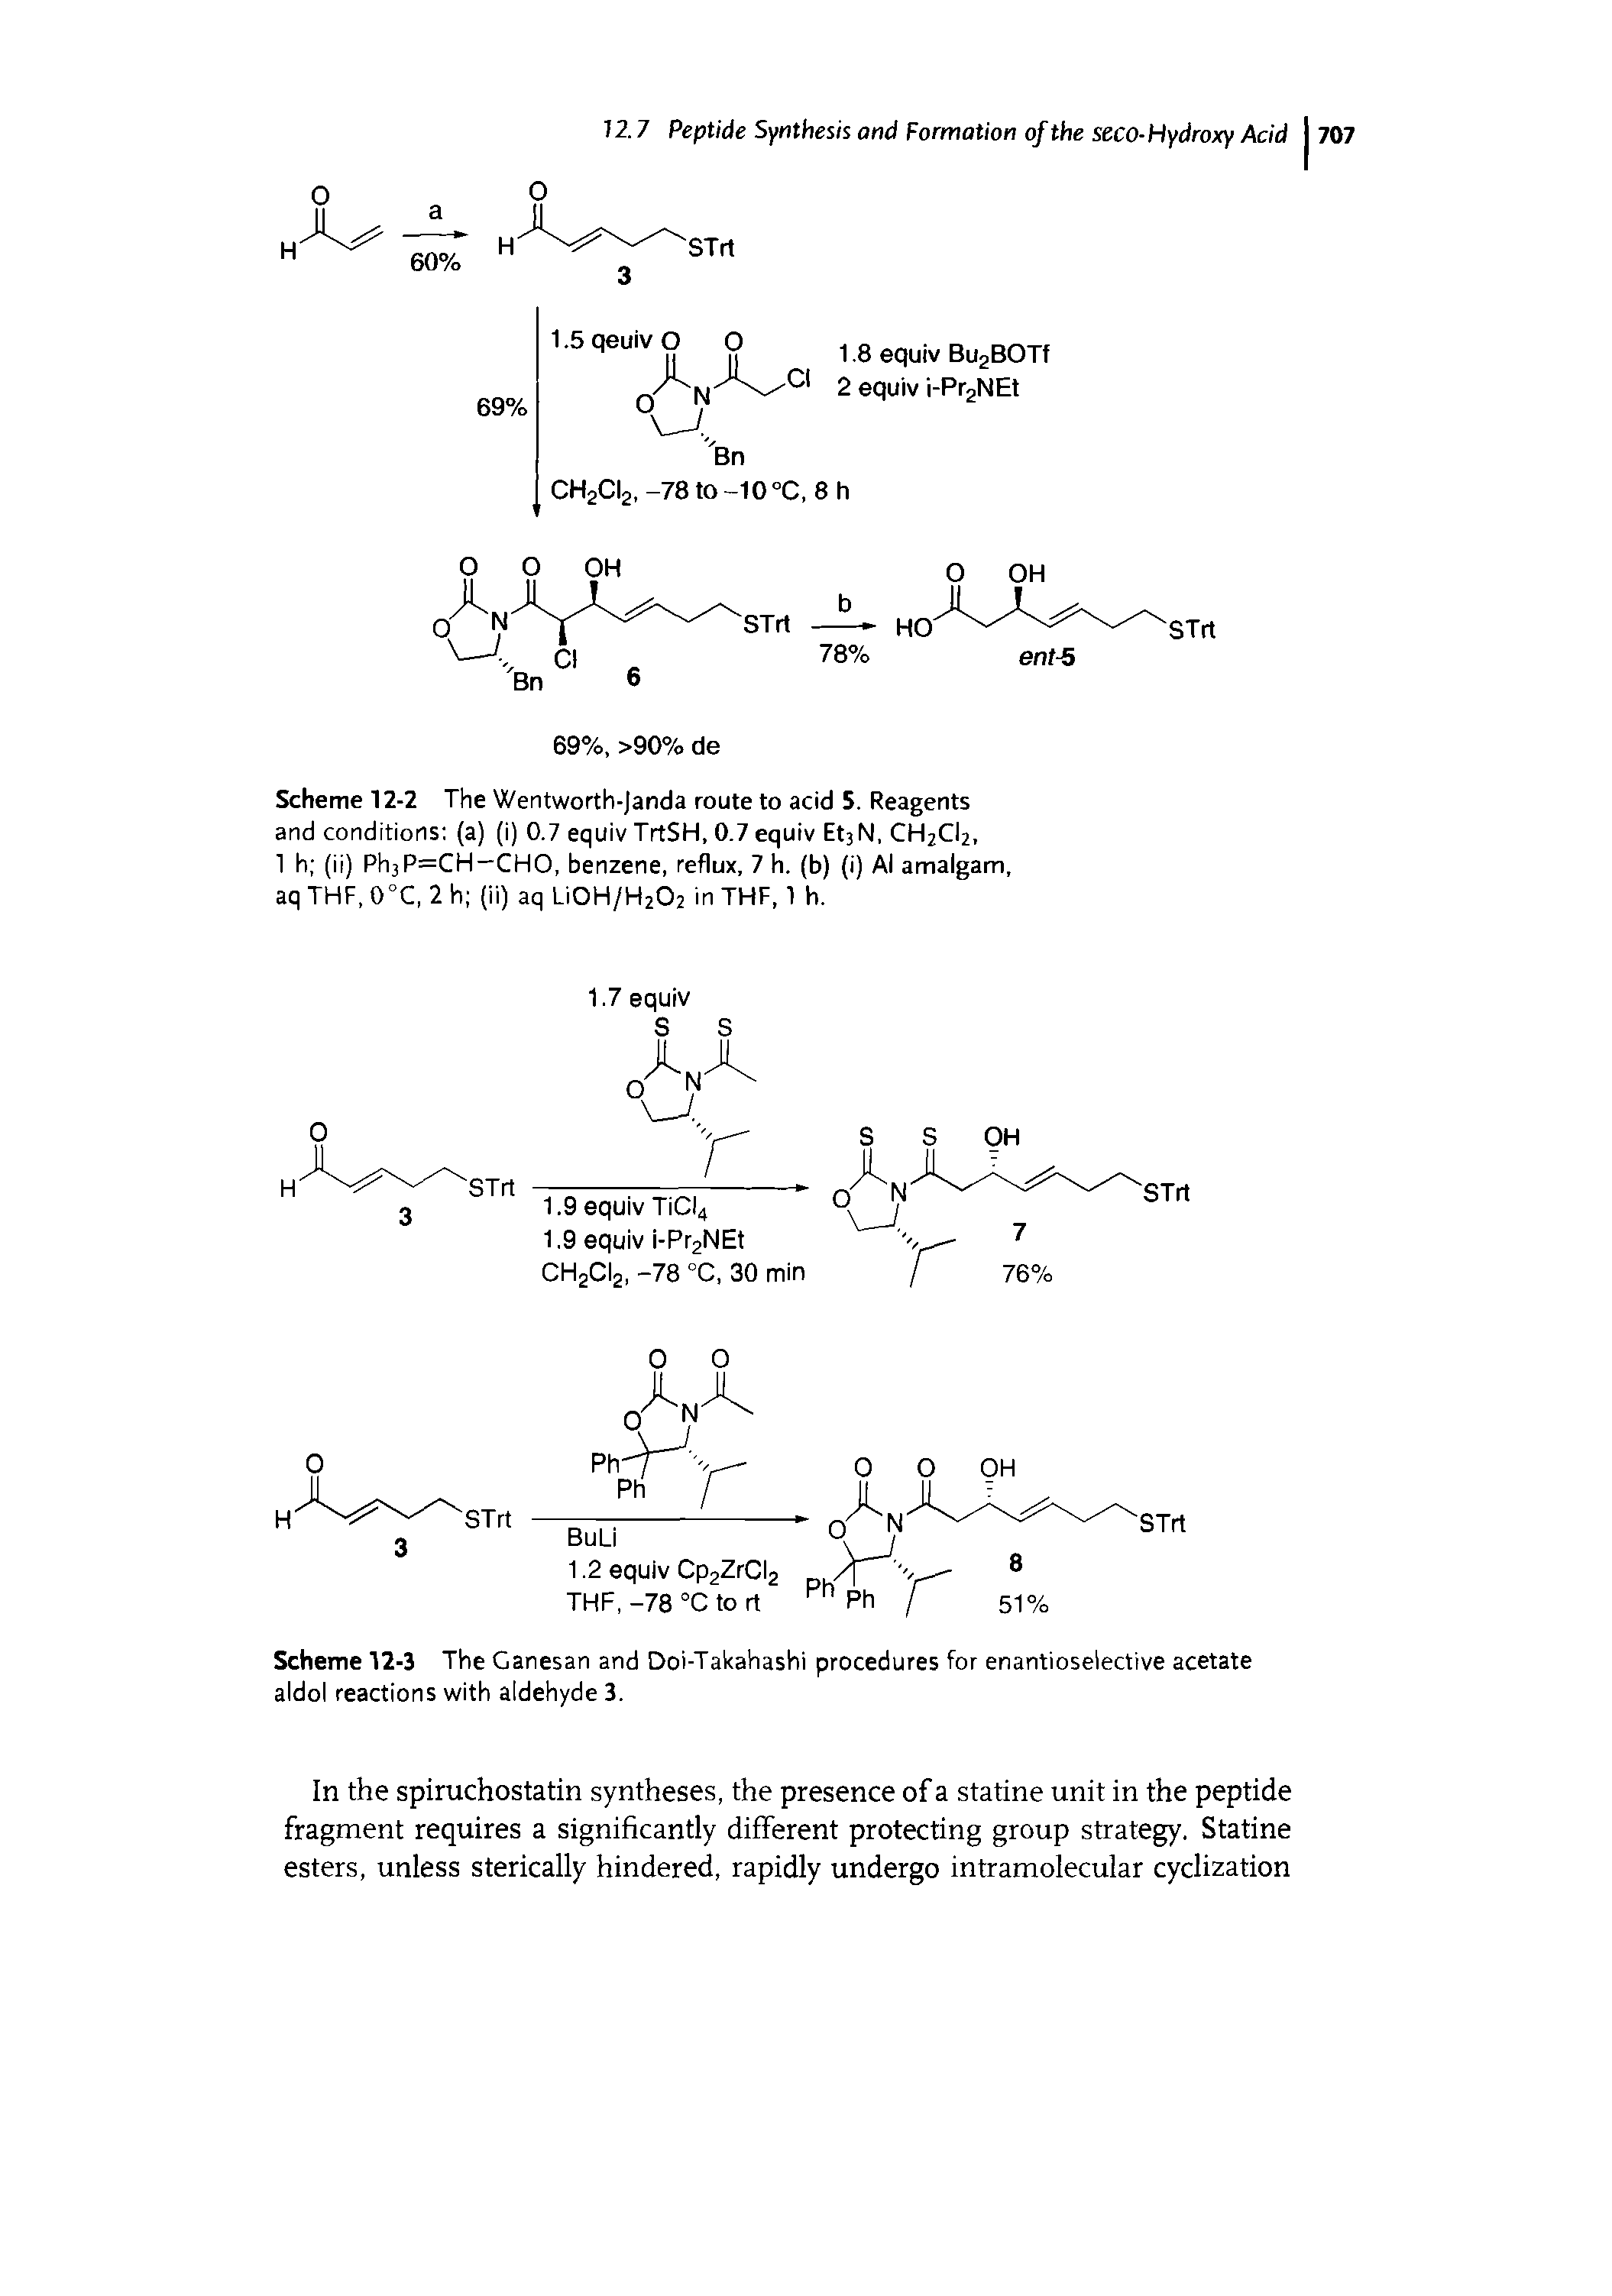 Scheme 12-3 The Canesan and Doi-Takahashi procedures for enantioselective acetate aldol reactions with aldehyde 3.